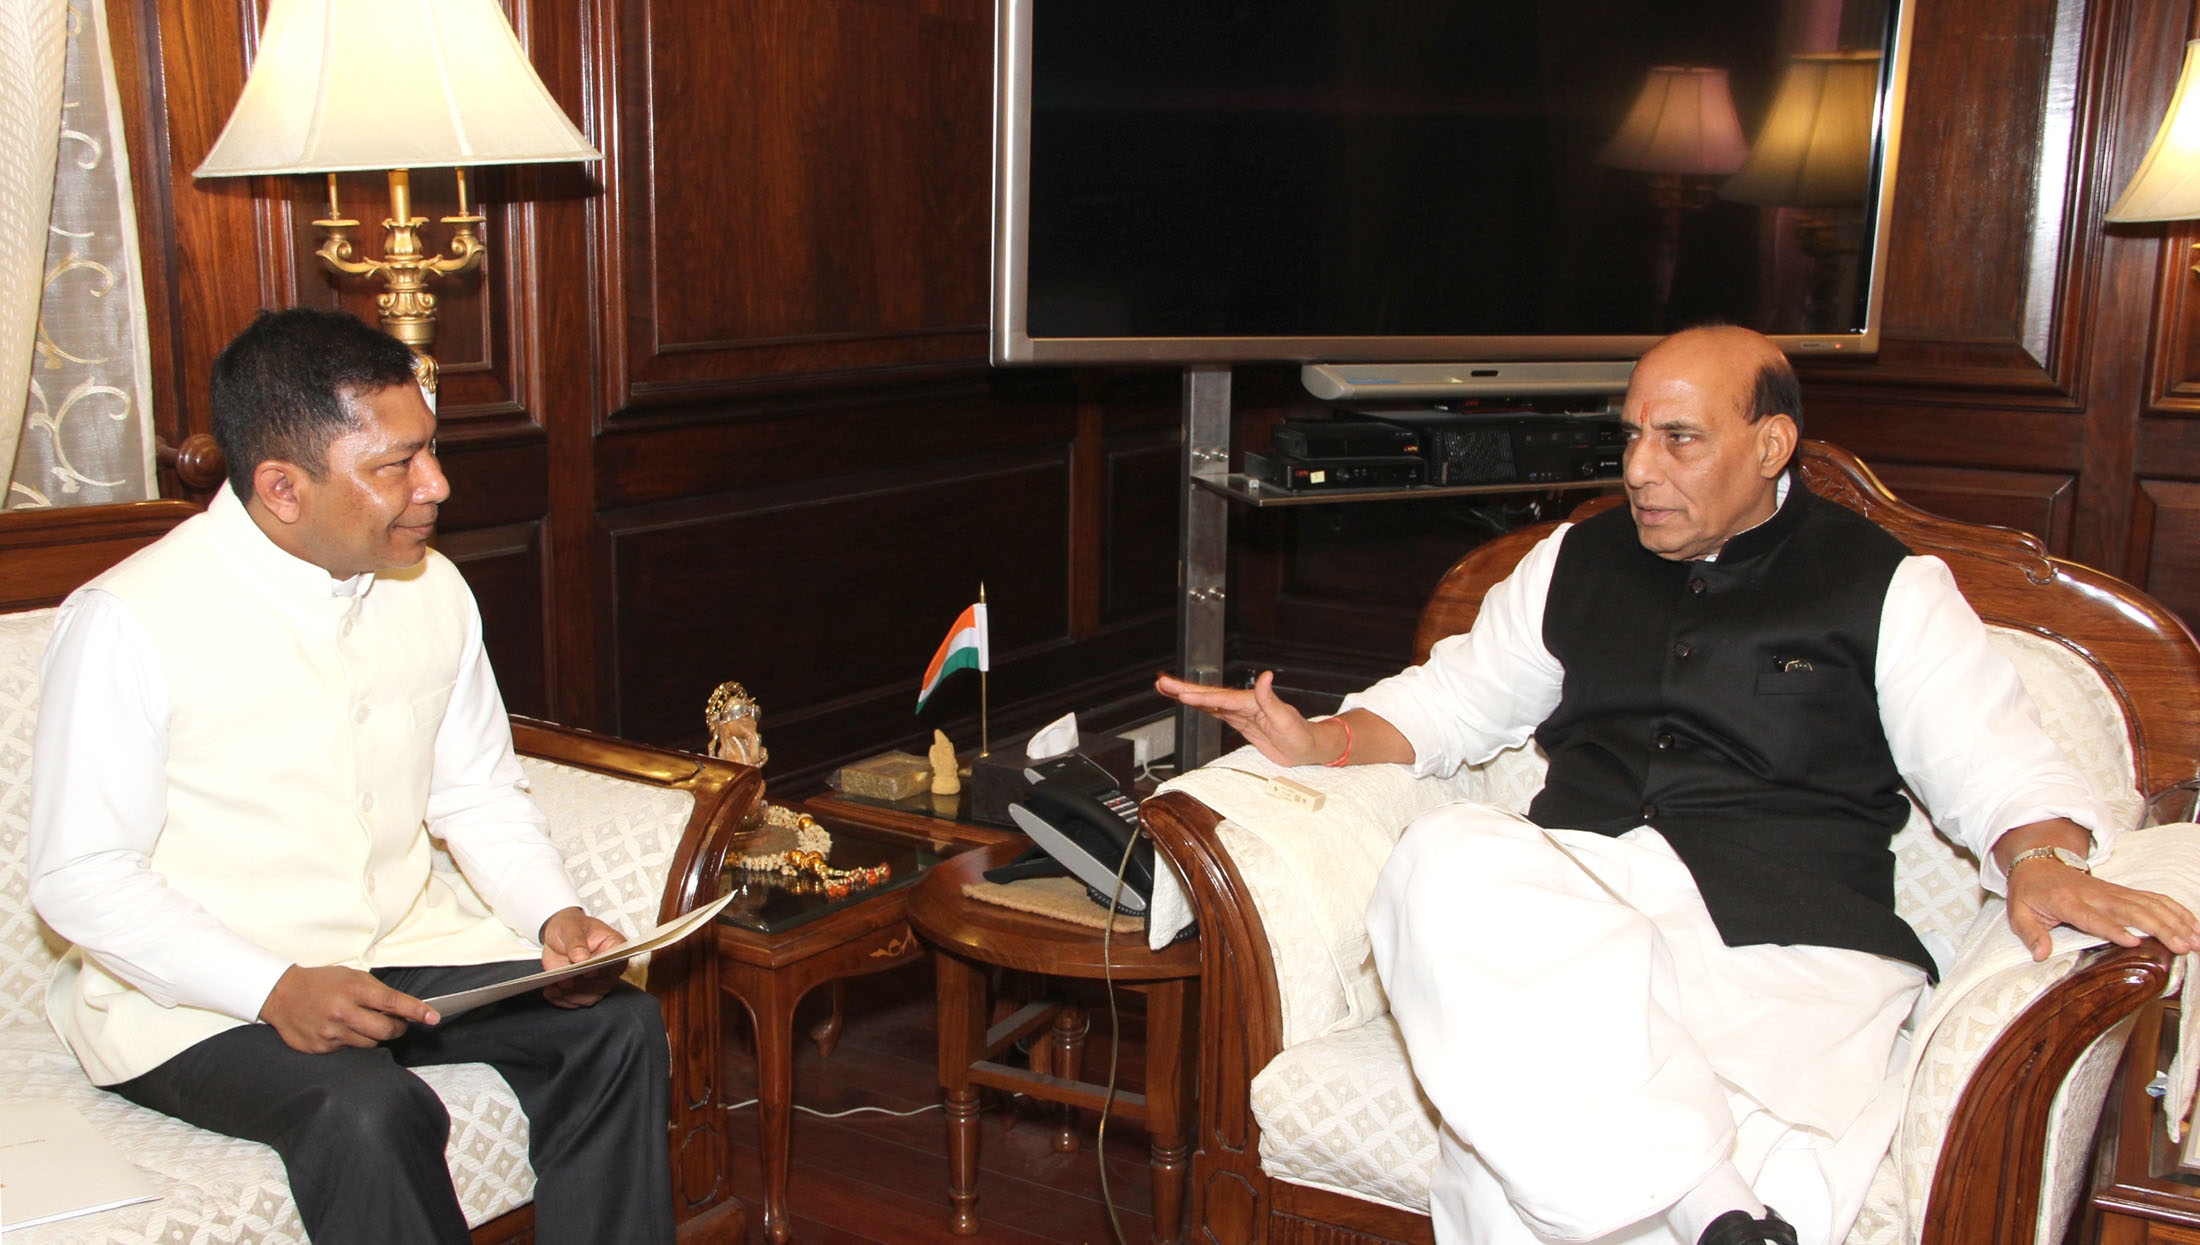 The Chief Minister of Meghalaya, Dr. Mukul Sangma calling on the Union Home Minister, Shri Rajnath Singh, in New Delhi on January 18, 2016.